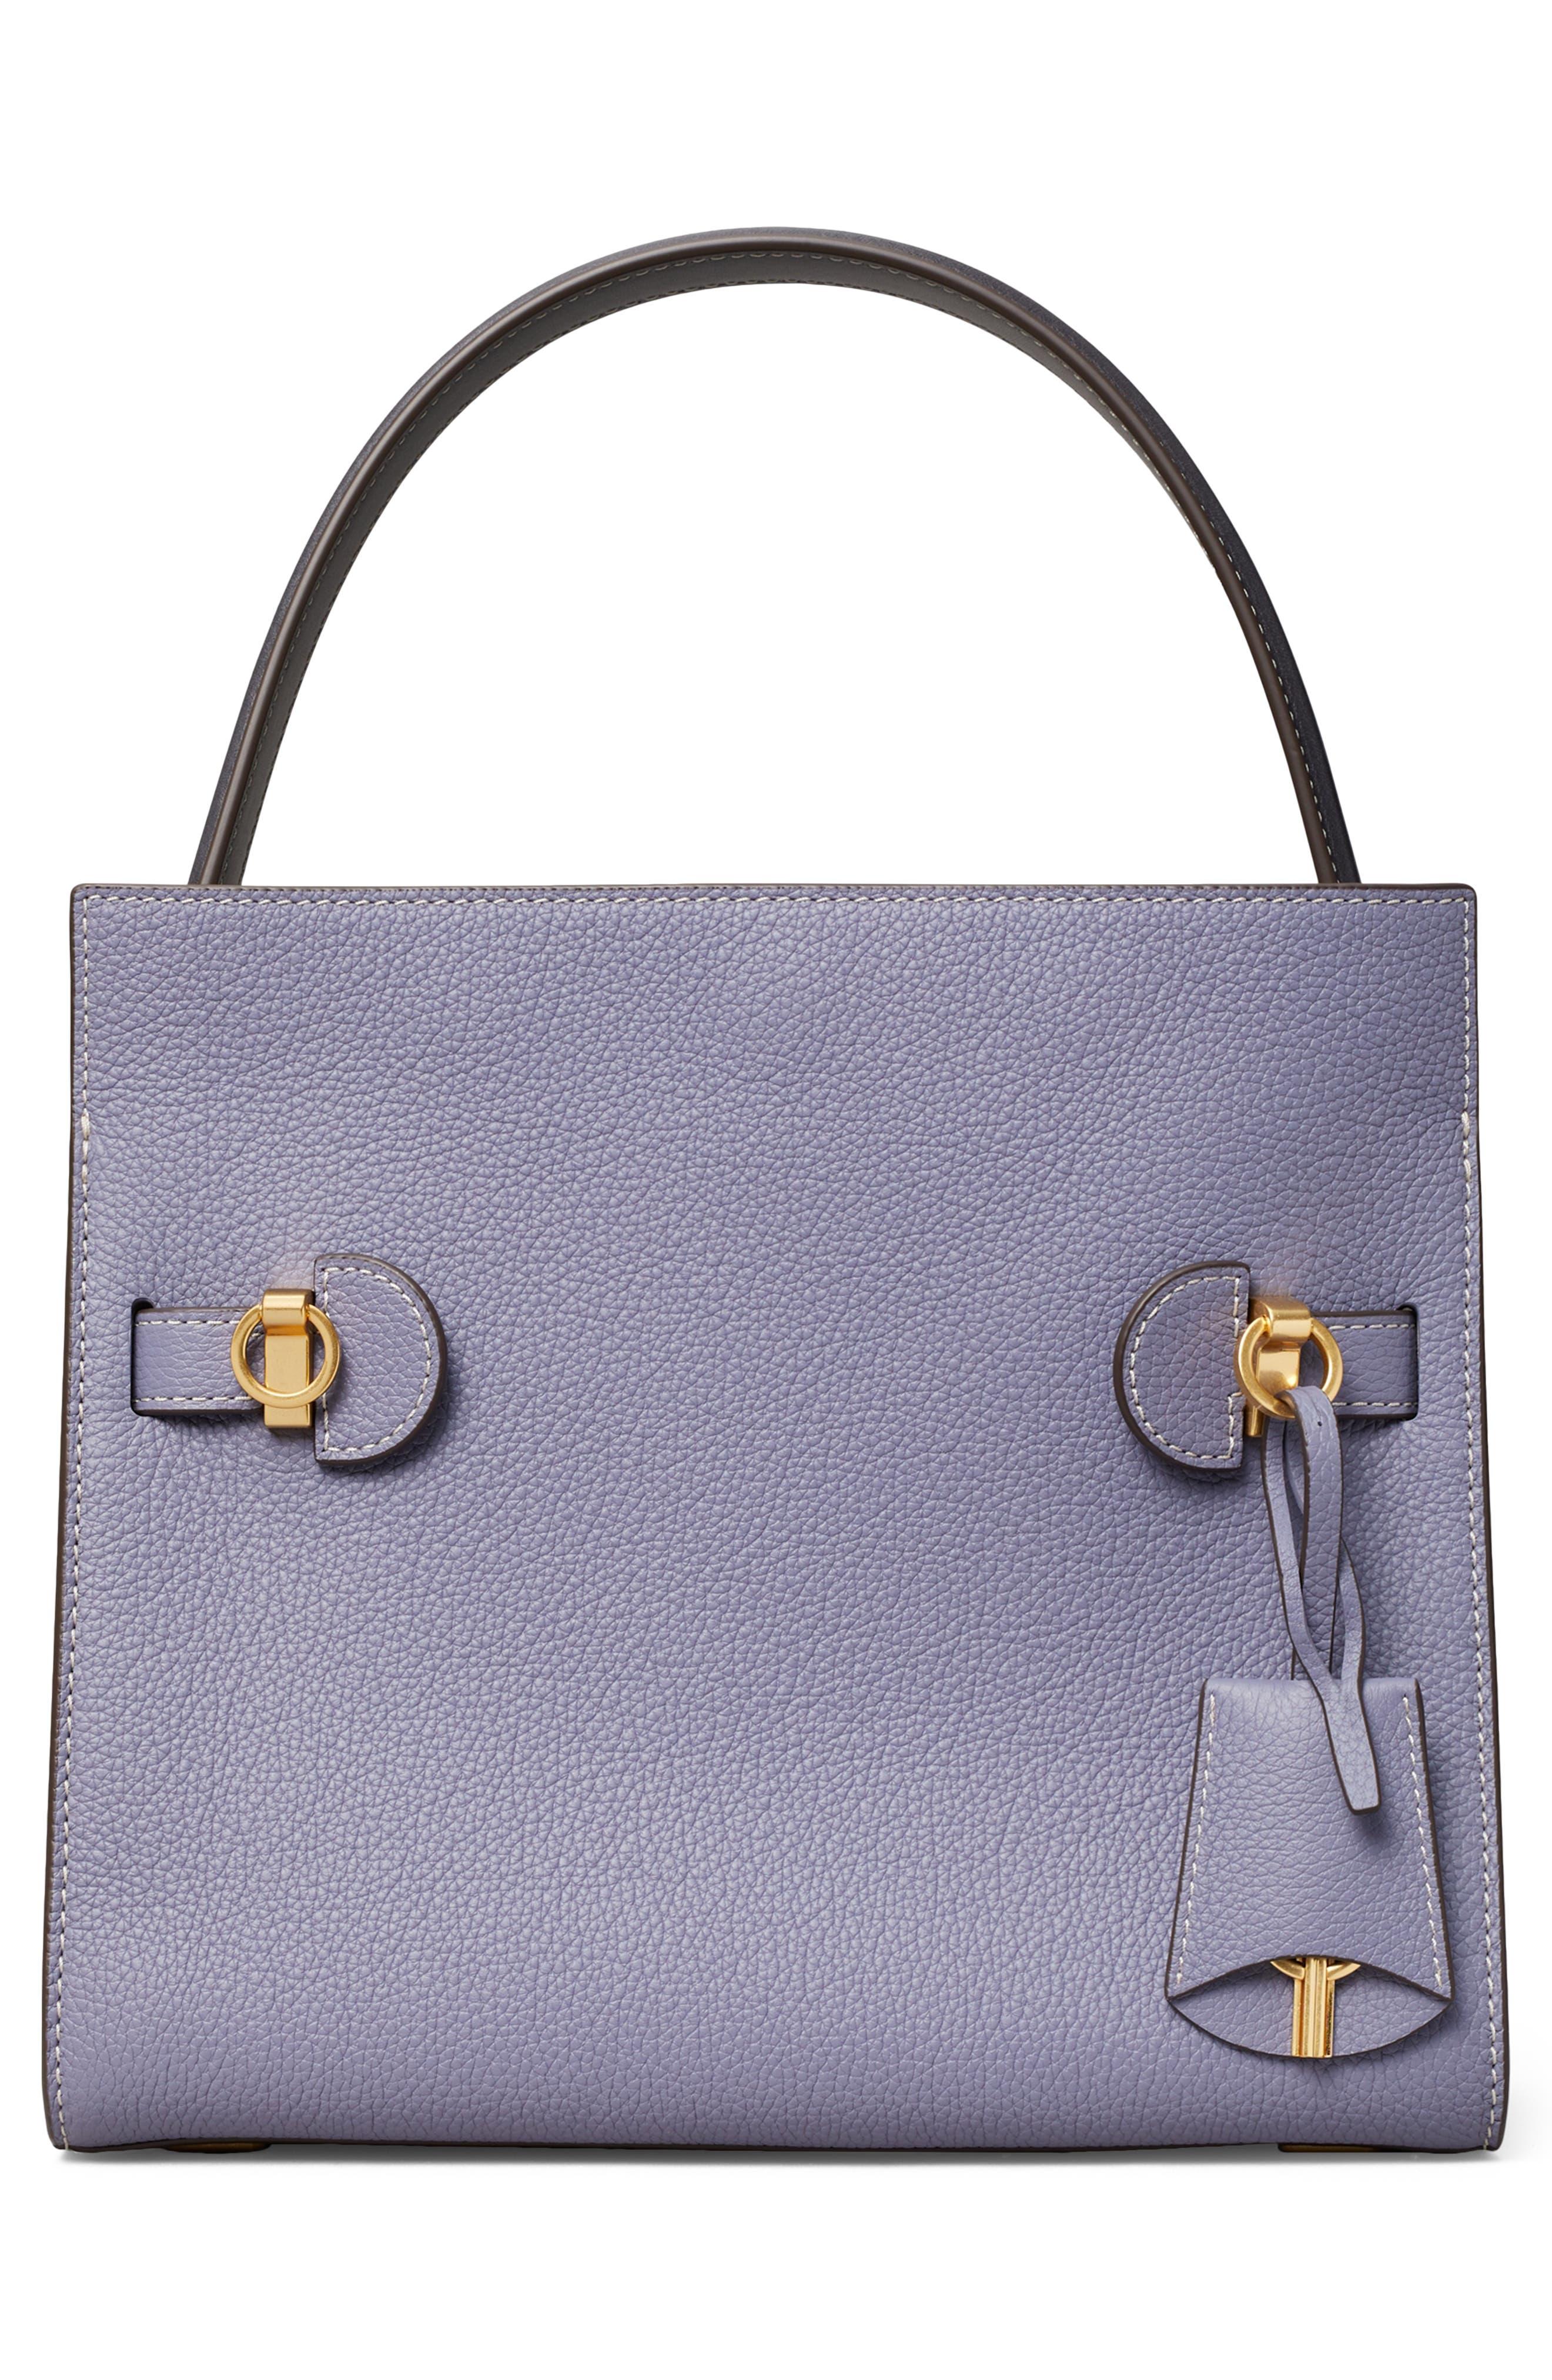 Tory Burch Lee Radziwill Small Pebble Leather Double Bag in Blue